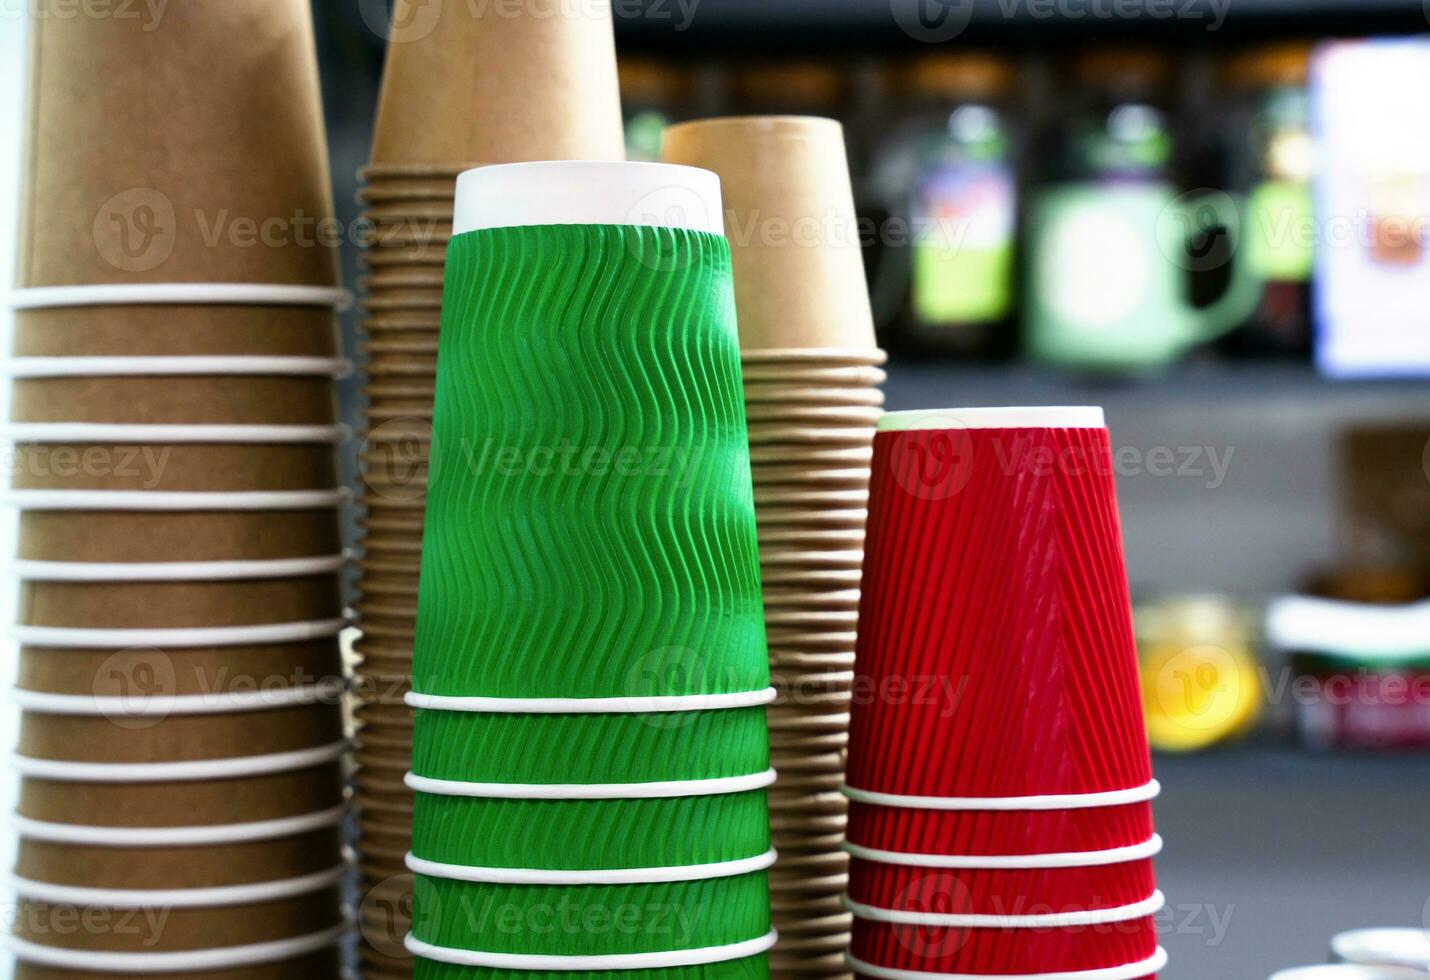 A stack of colorful disposable paper cups in a cafe. Paper cups from kraft paper for various drinks. Close-up. Selective focus. photo